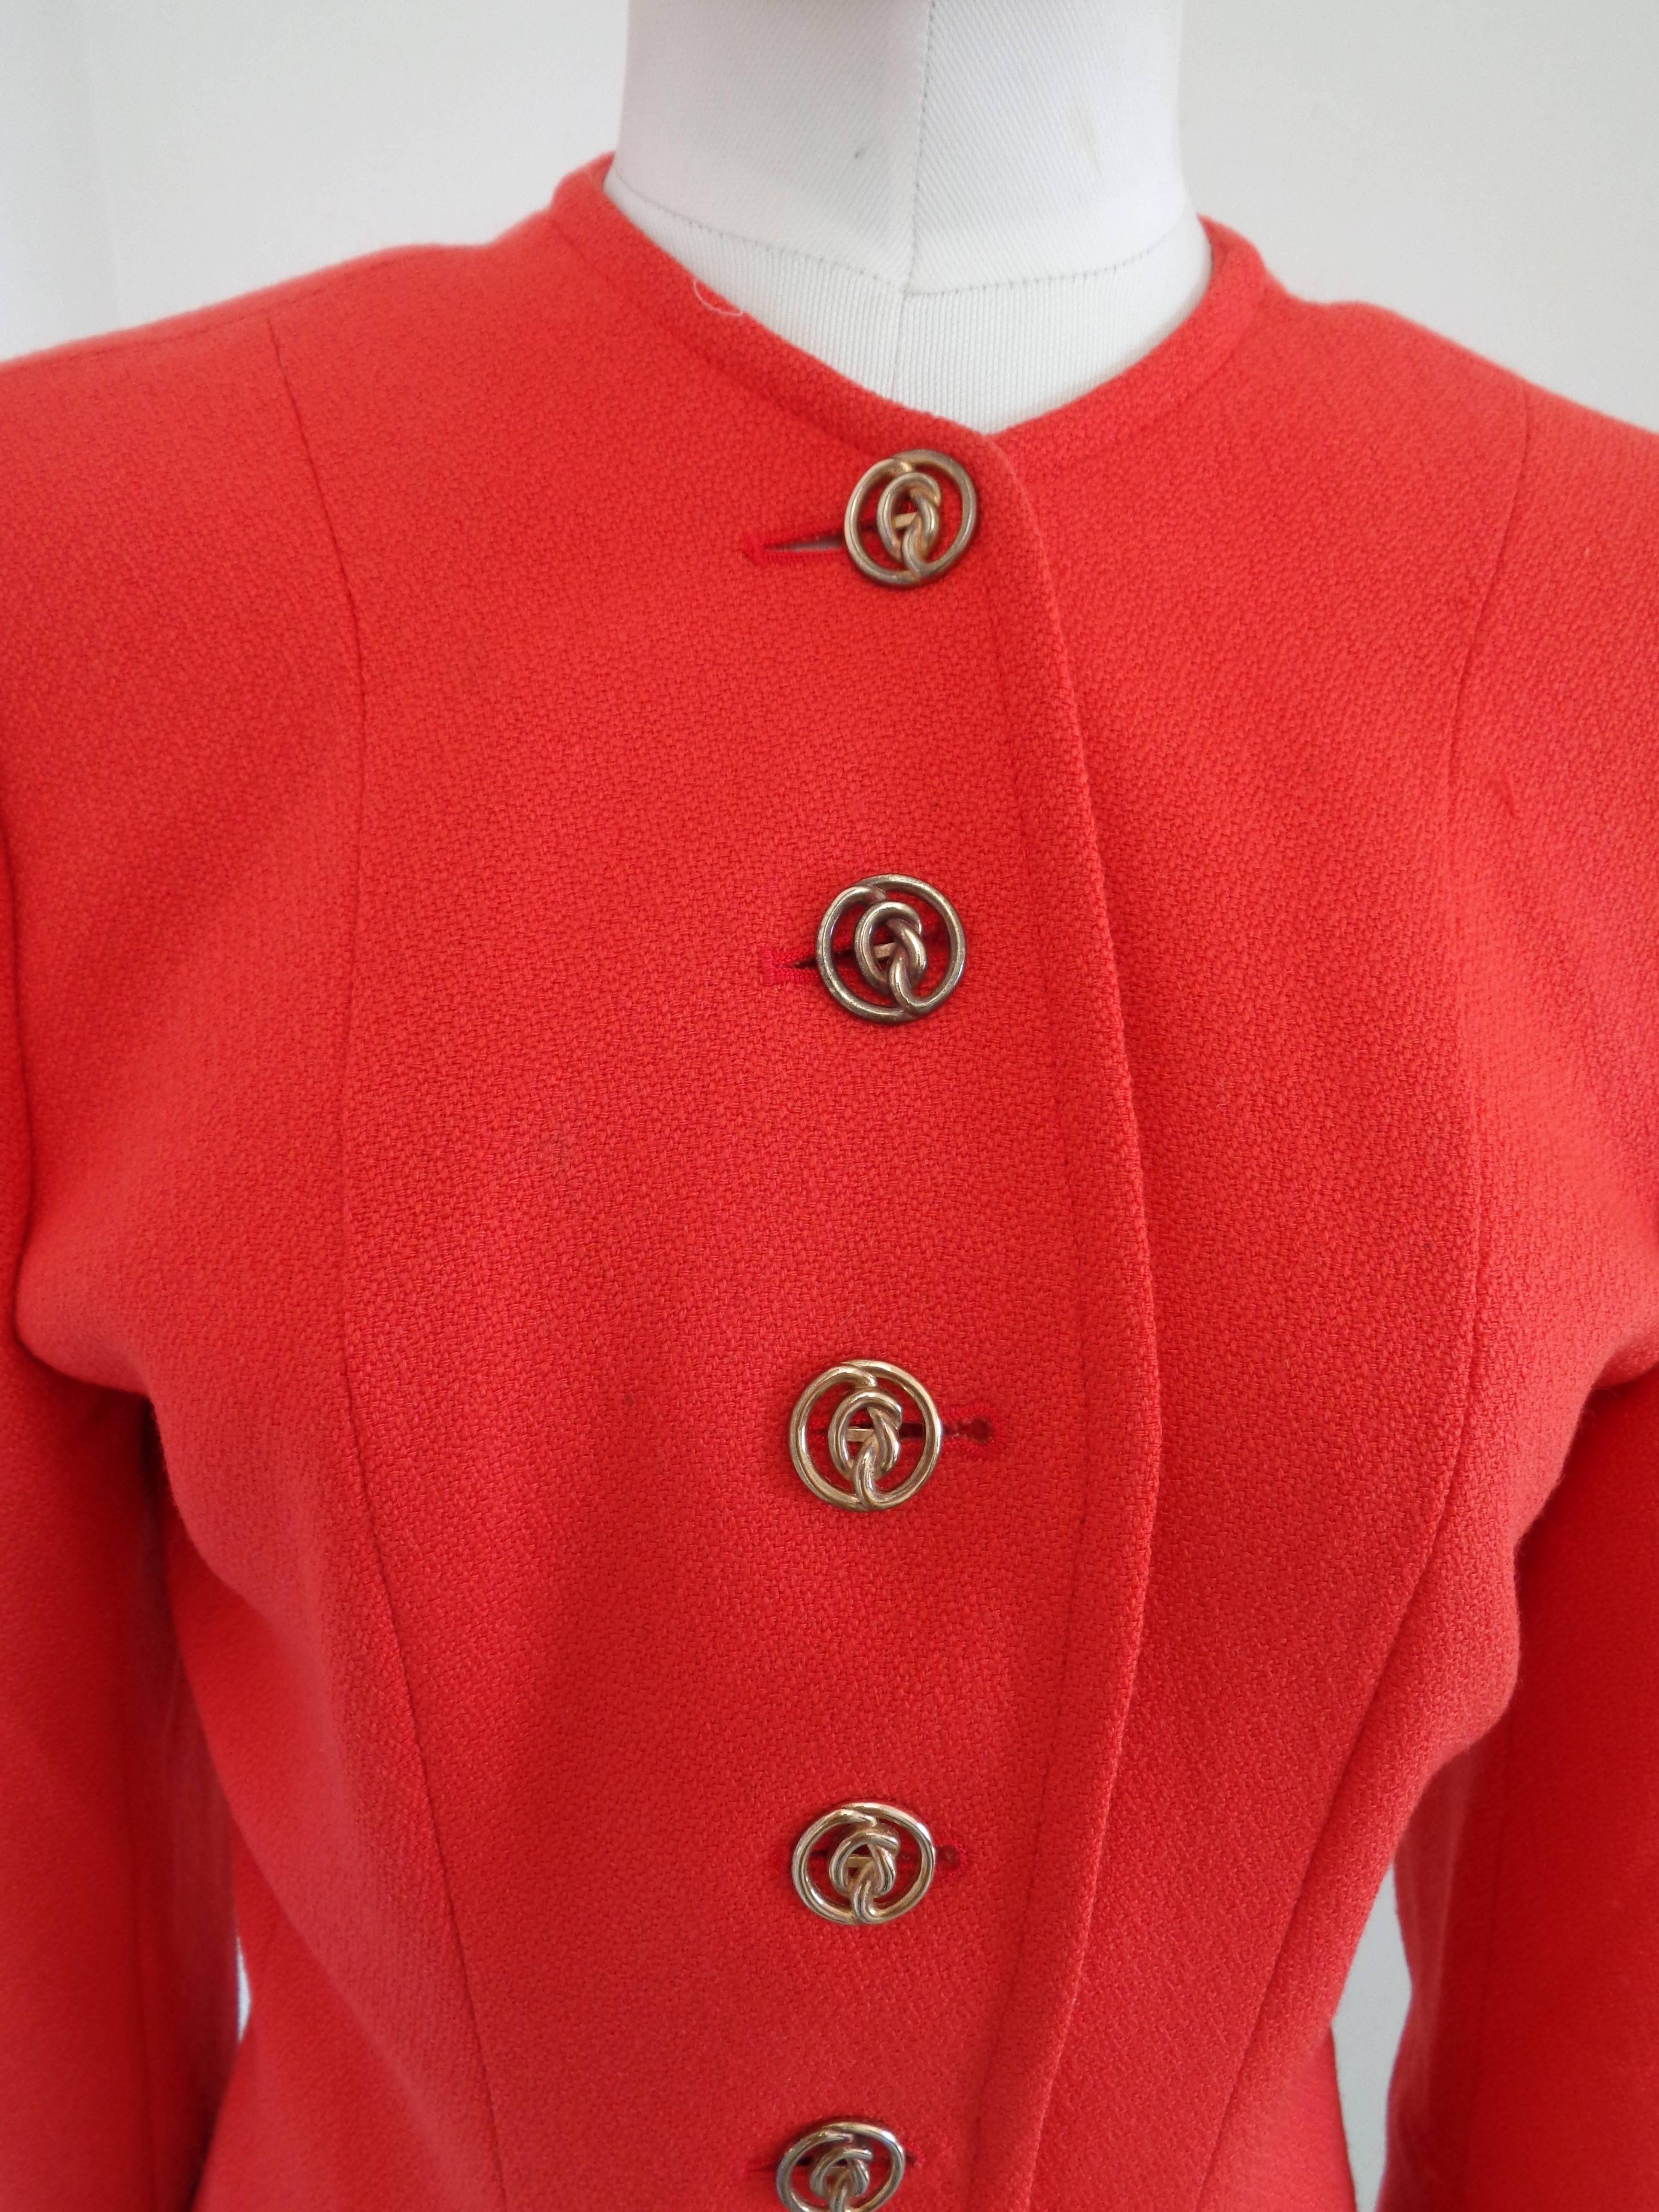 Yves Saint Laurent Red Wool Jacket

Totally made in italy in size 40

Composition: Wool

Gold tone bottons